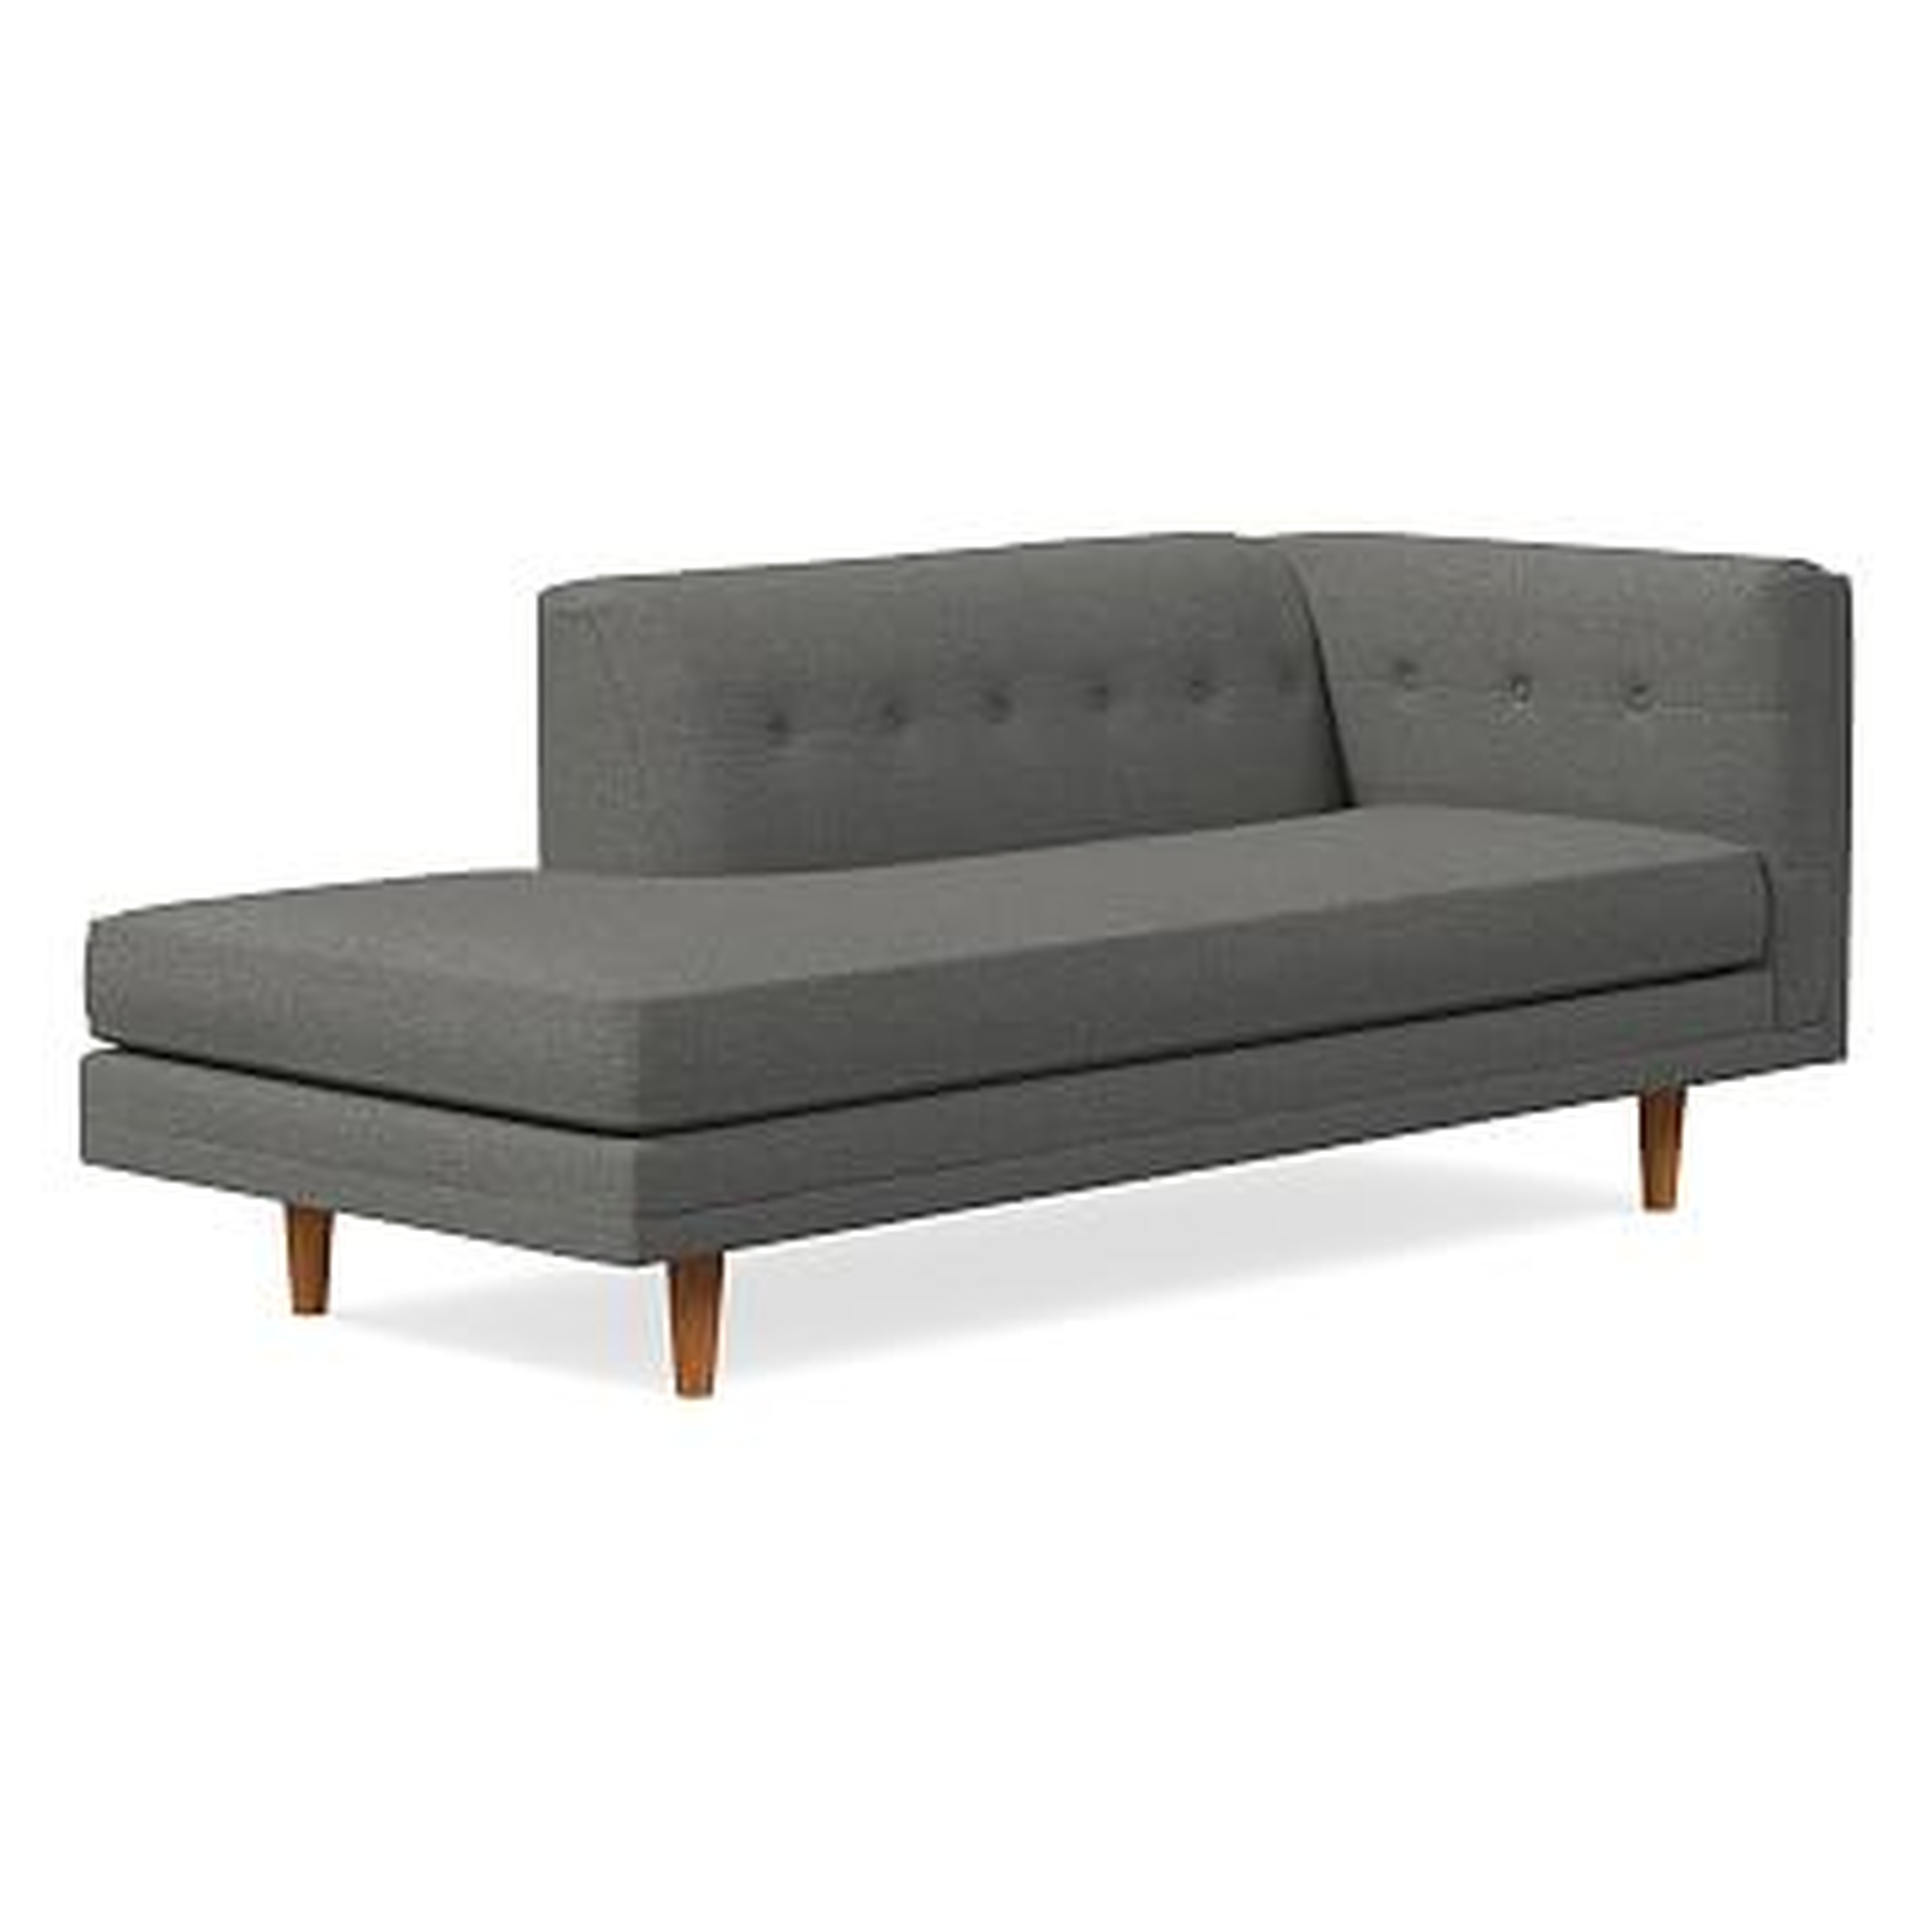 Bradford Right Arm Chaise Lounger, Chenille Tweed, Pewter, Pecan - West Elm